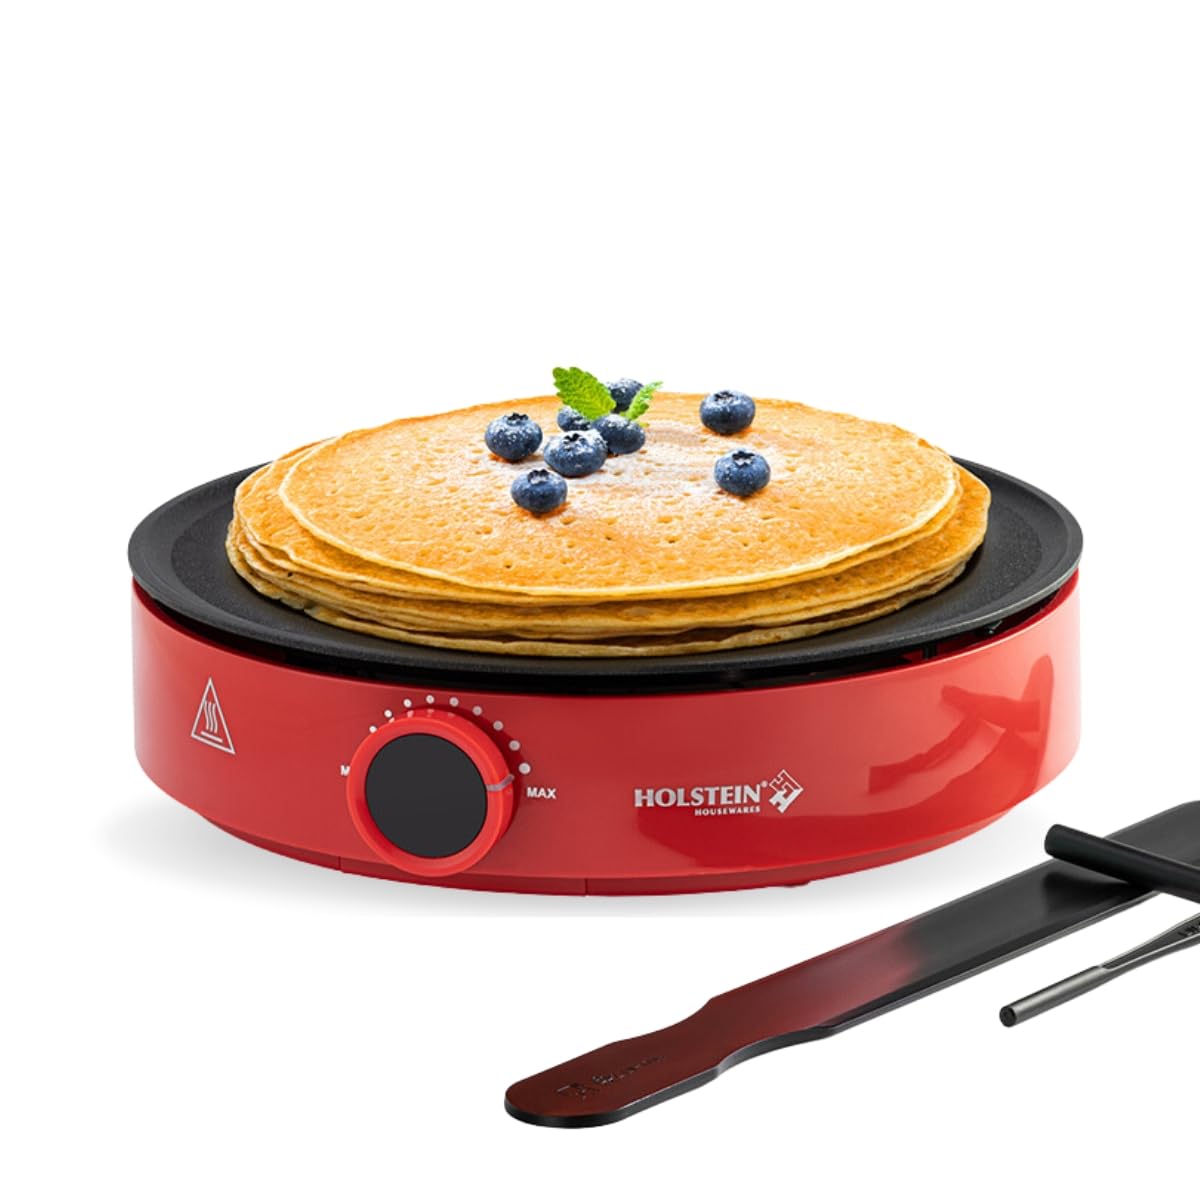 Holstein Housewares 12” Crepe Maker - Adjustable Temperature Control - Nonstick Griddle for Versatile Cooking of Crepes, Blintzes, Pancakes, Eggs, Bacon & More - Easy to Clean - Indicator Lights